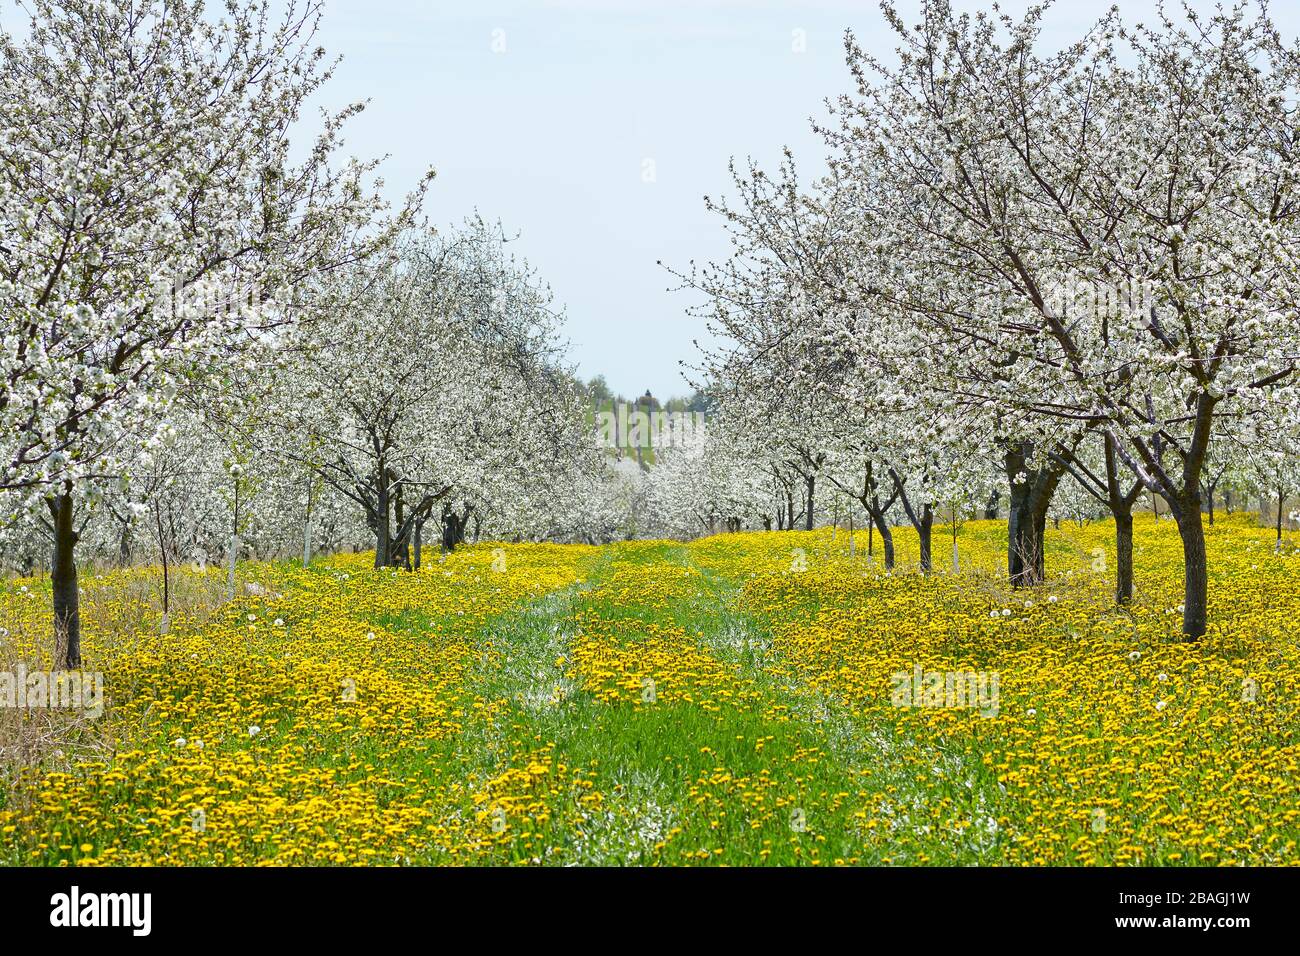 Cherry trees in bloom. White blossoms, Spring. Yellow dandelions in the grass. Traverse City, Michigan. Stock Photo